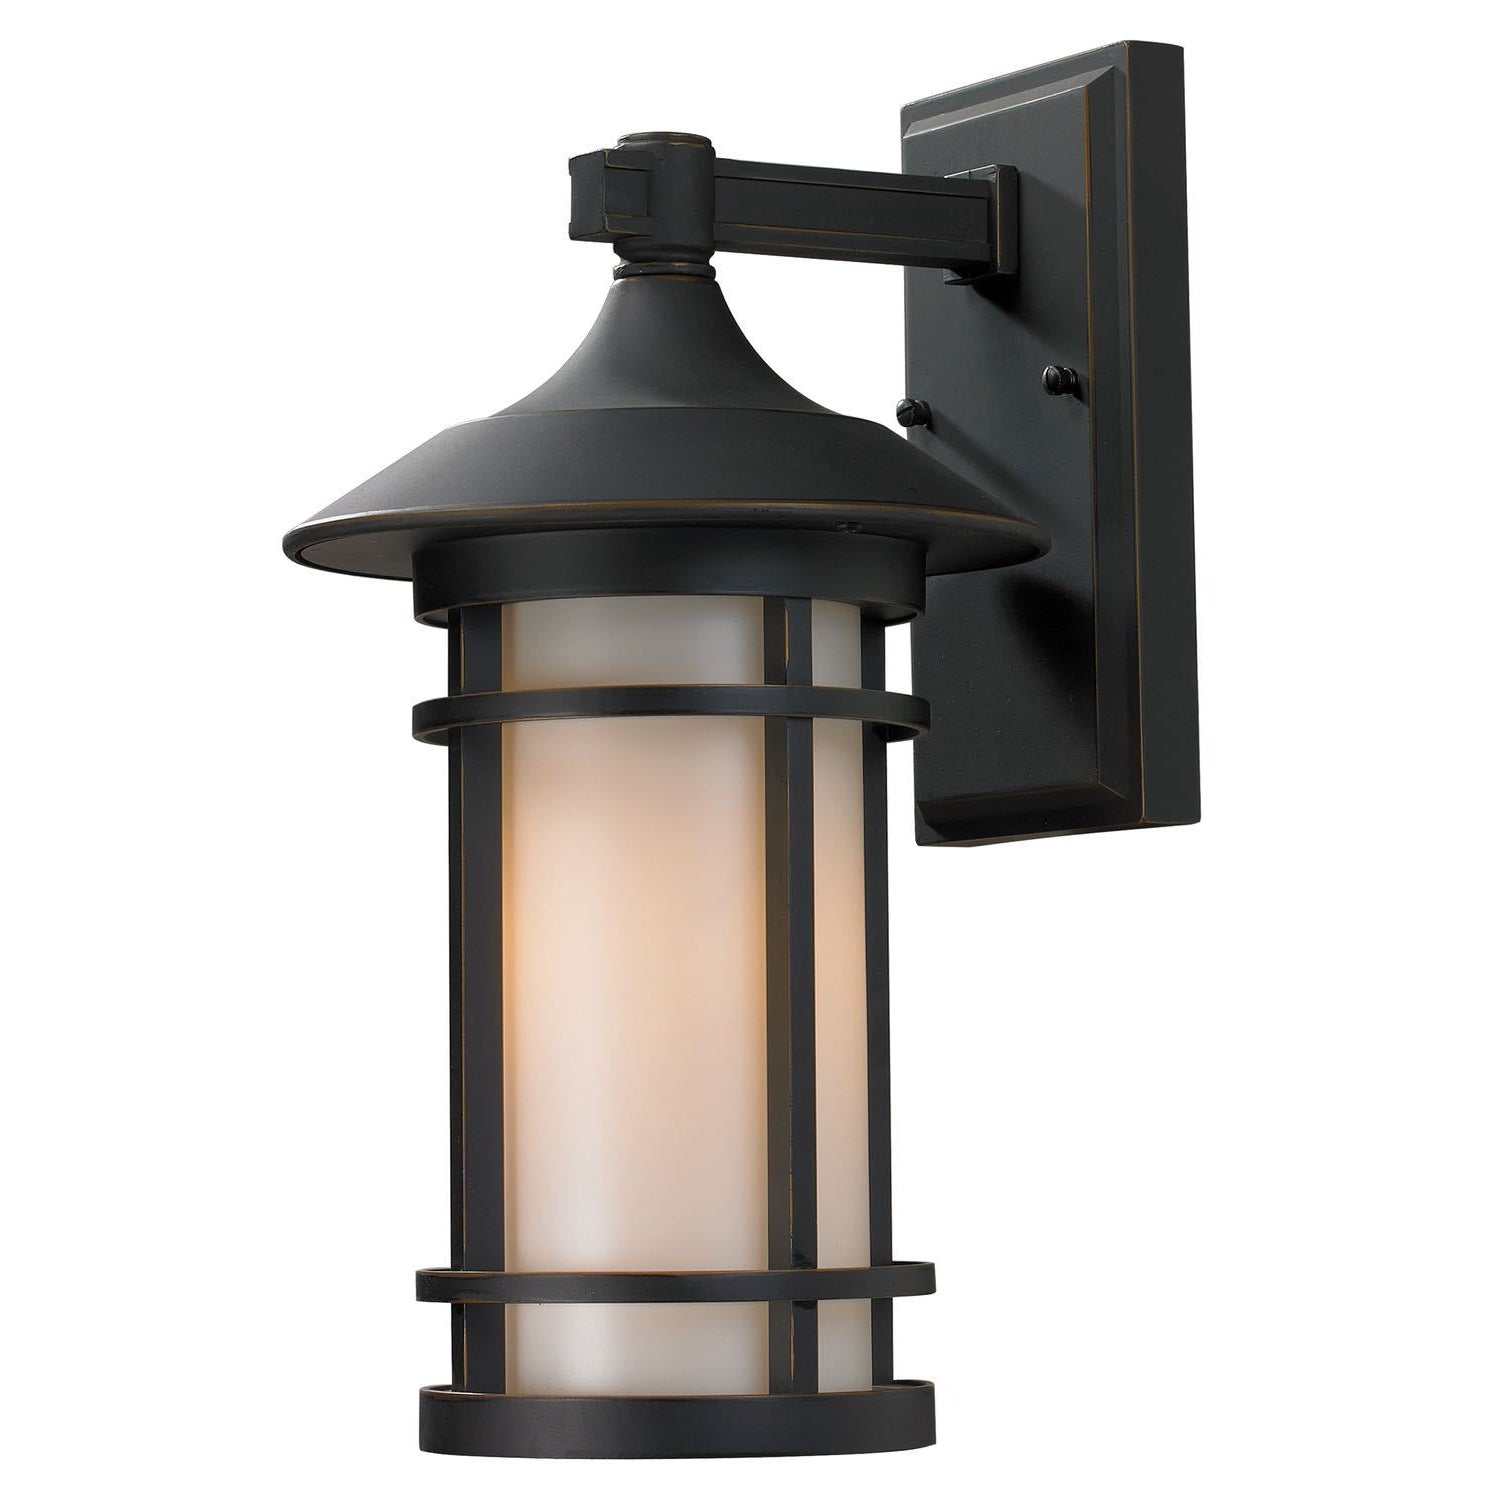 Woodland Outdoor Wall Light Oil Rubbed Bronze